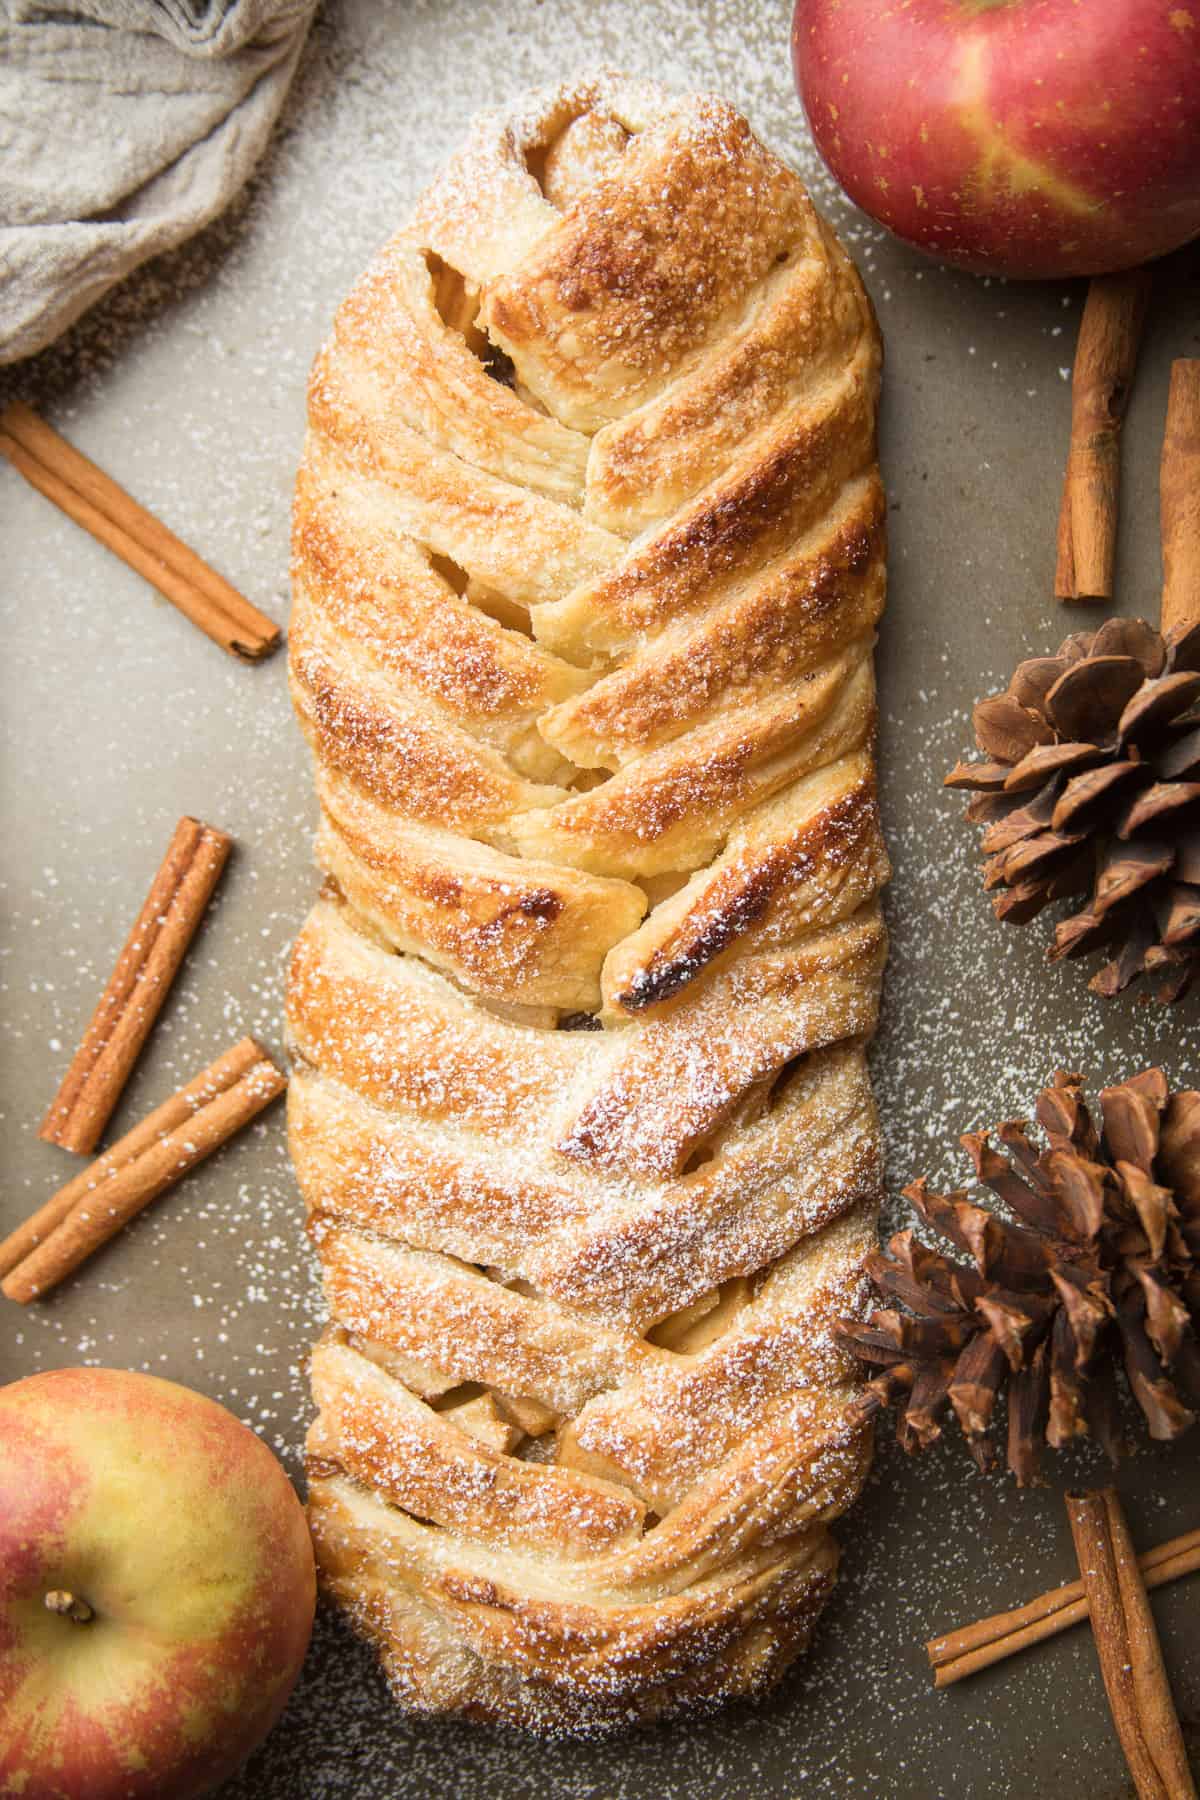 Vegan Apple Strudel on a baking sheet, surrounded by cinnamon sticks, pine cones, and apples.